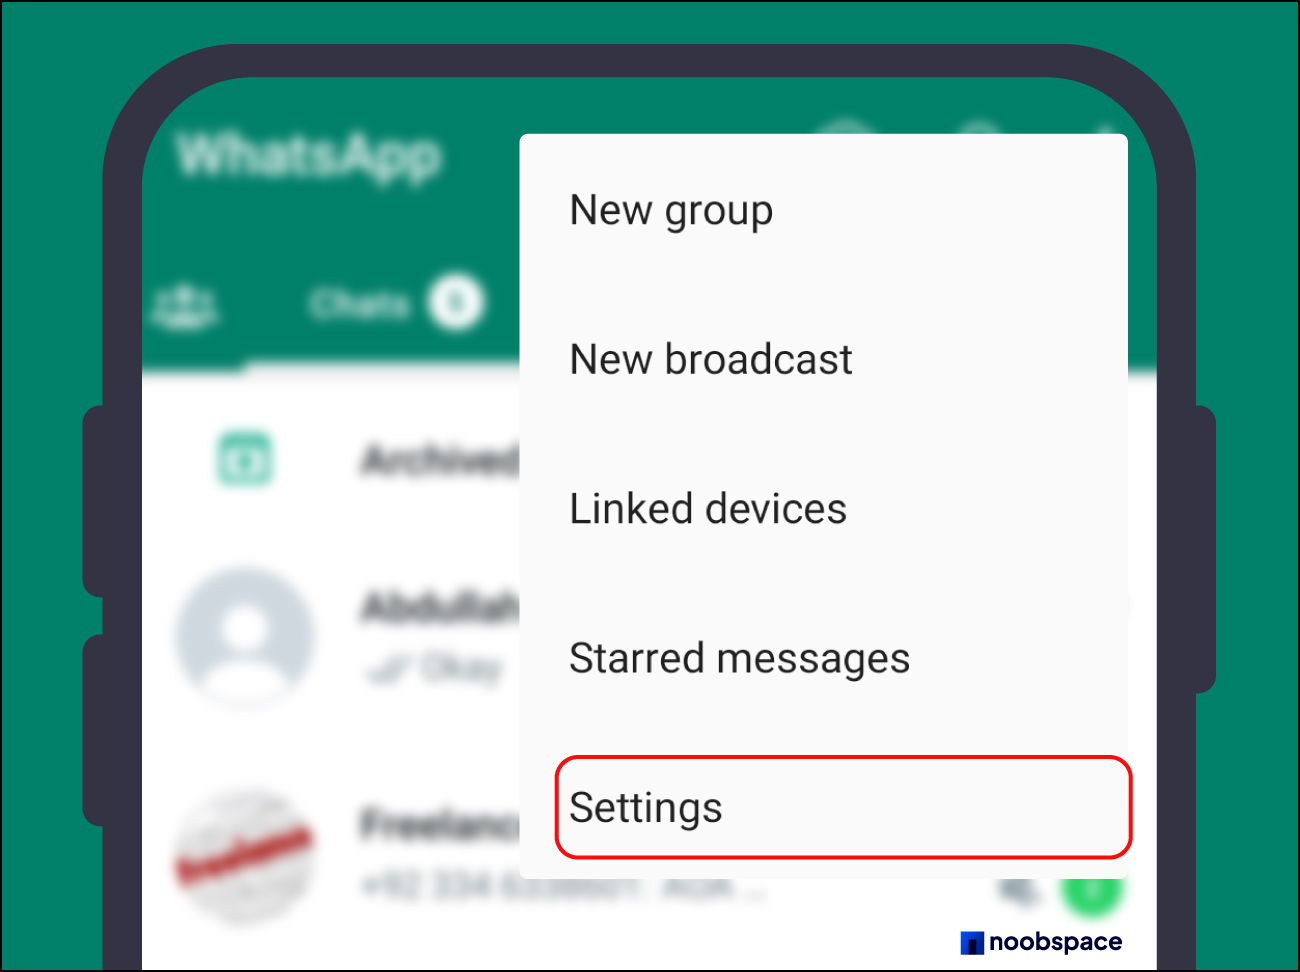 Open Settings in WhatsApp from the top right three dots menu